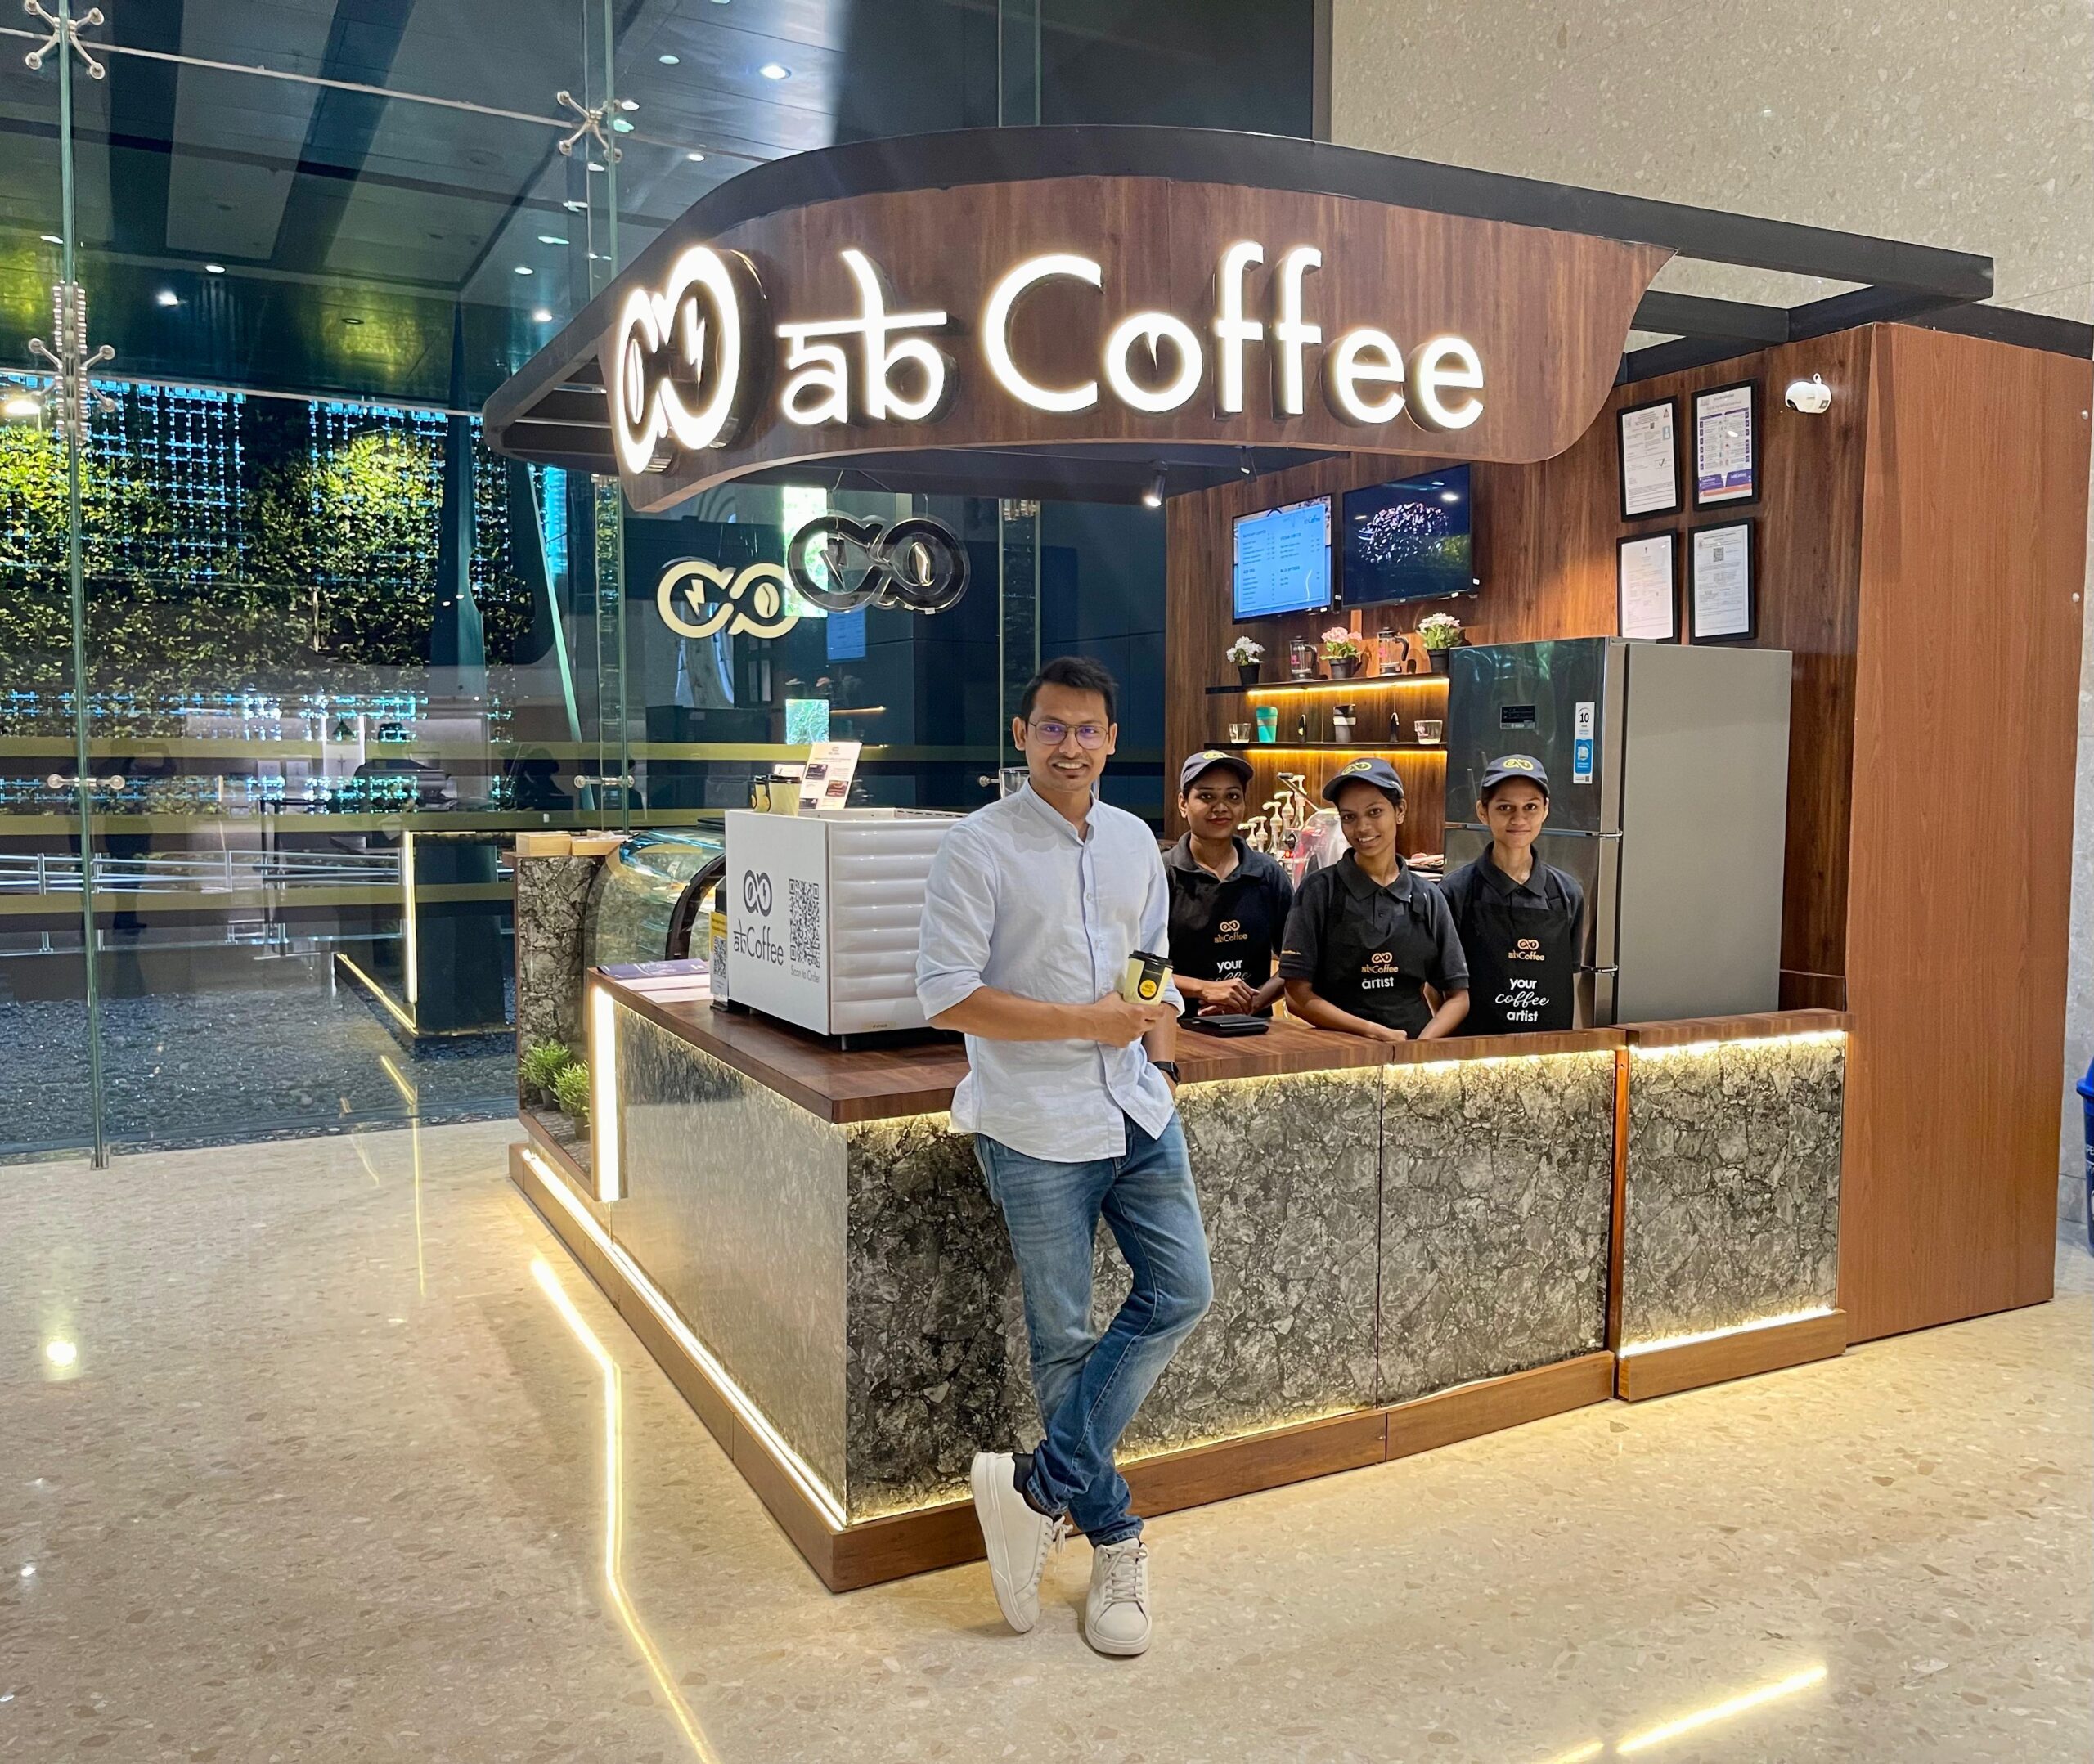 abCoffee raises 2 million USD to make specialty coffee accessible to all